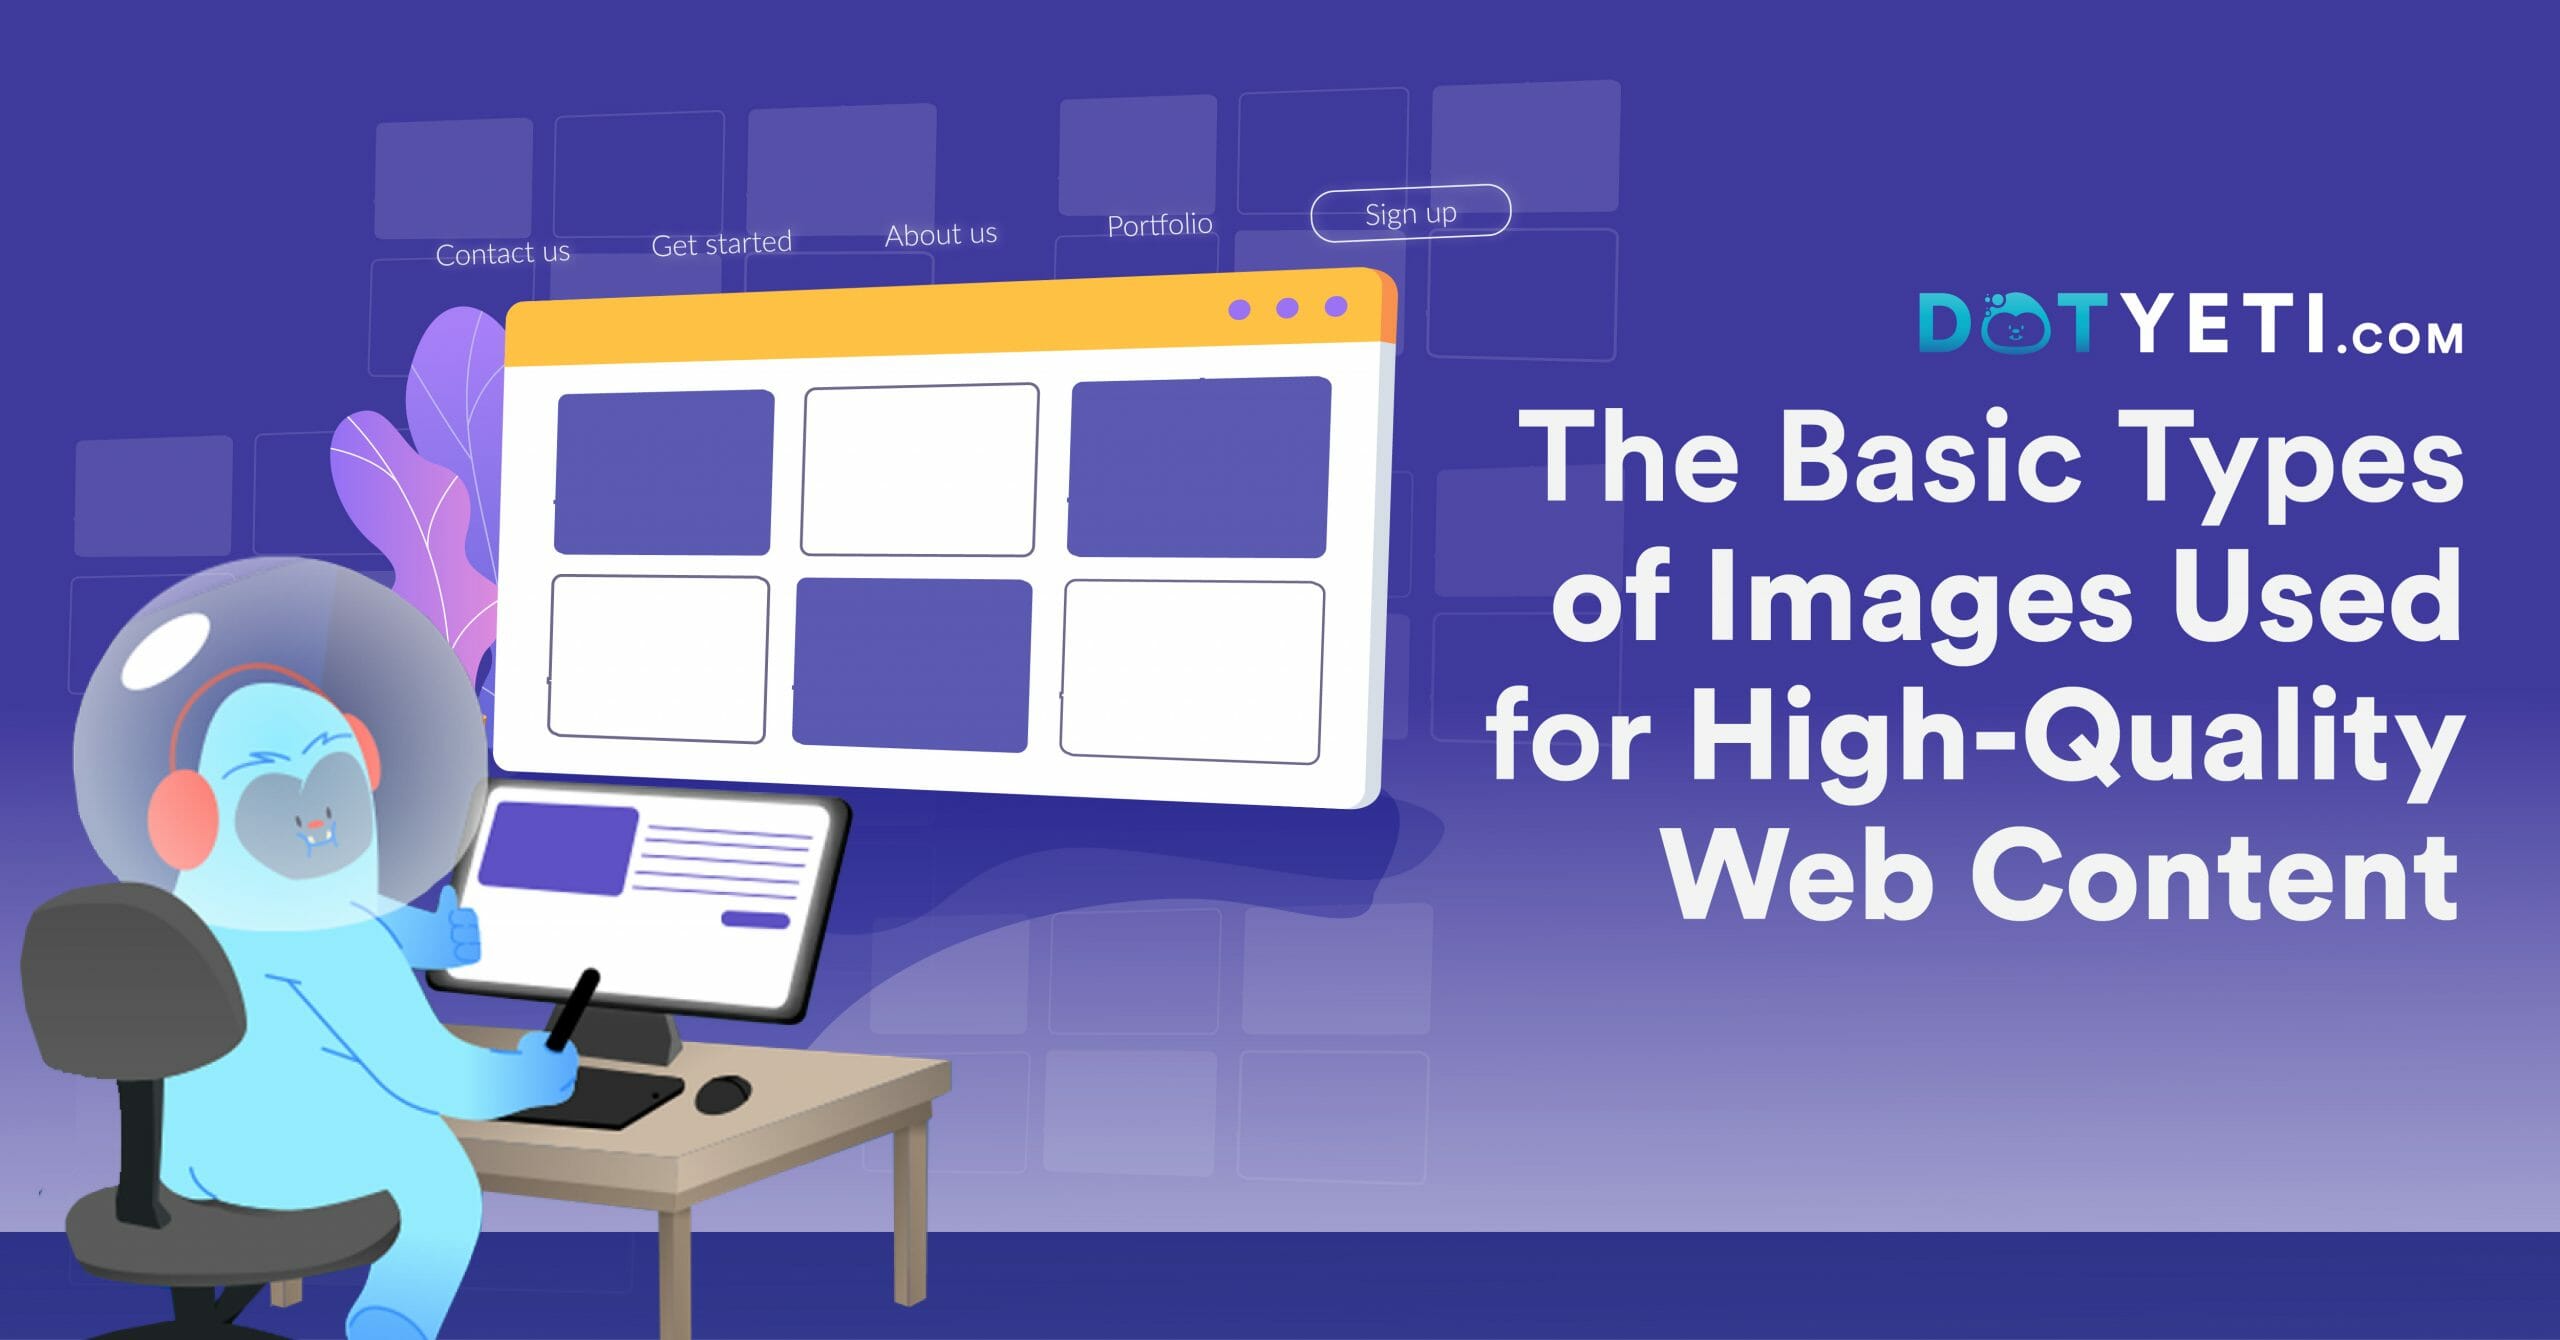 The Basic Types of Images Used for High-Quality Web Content